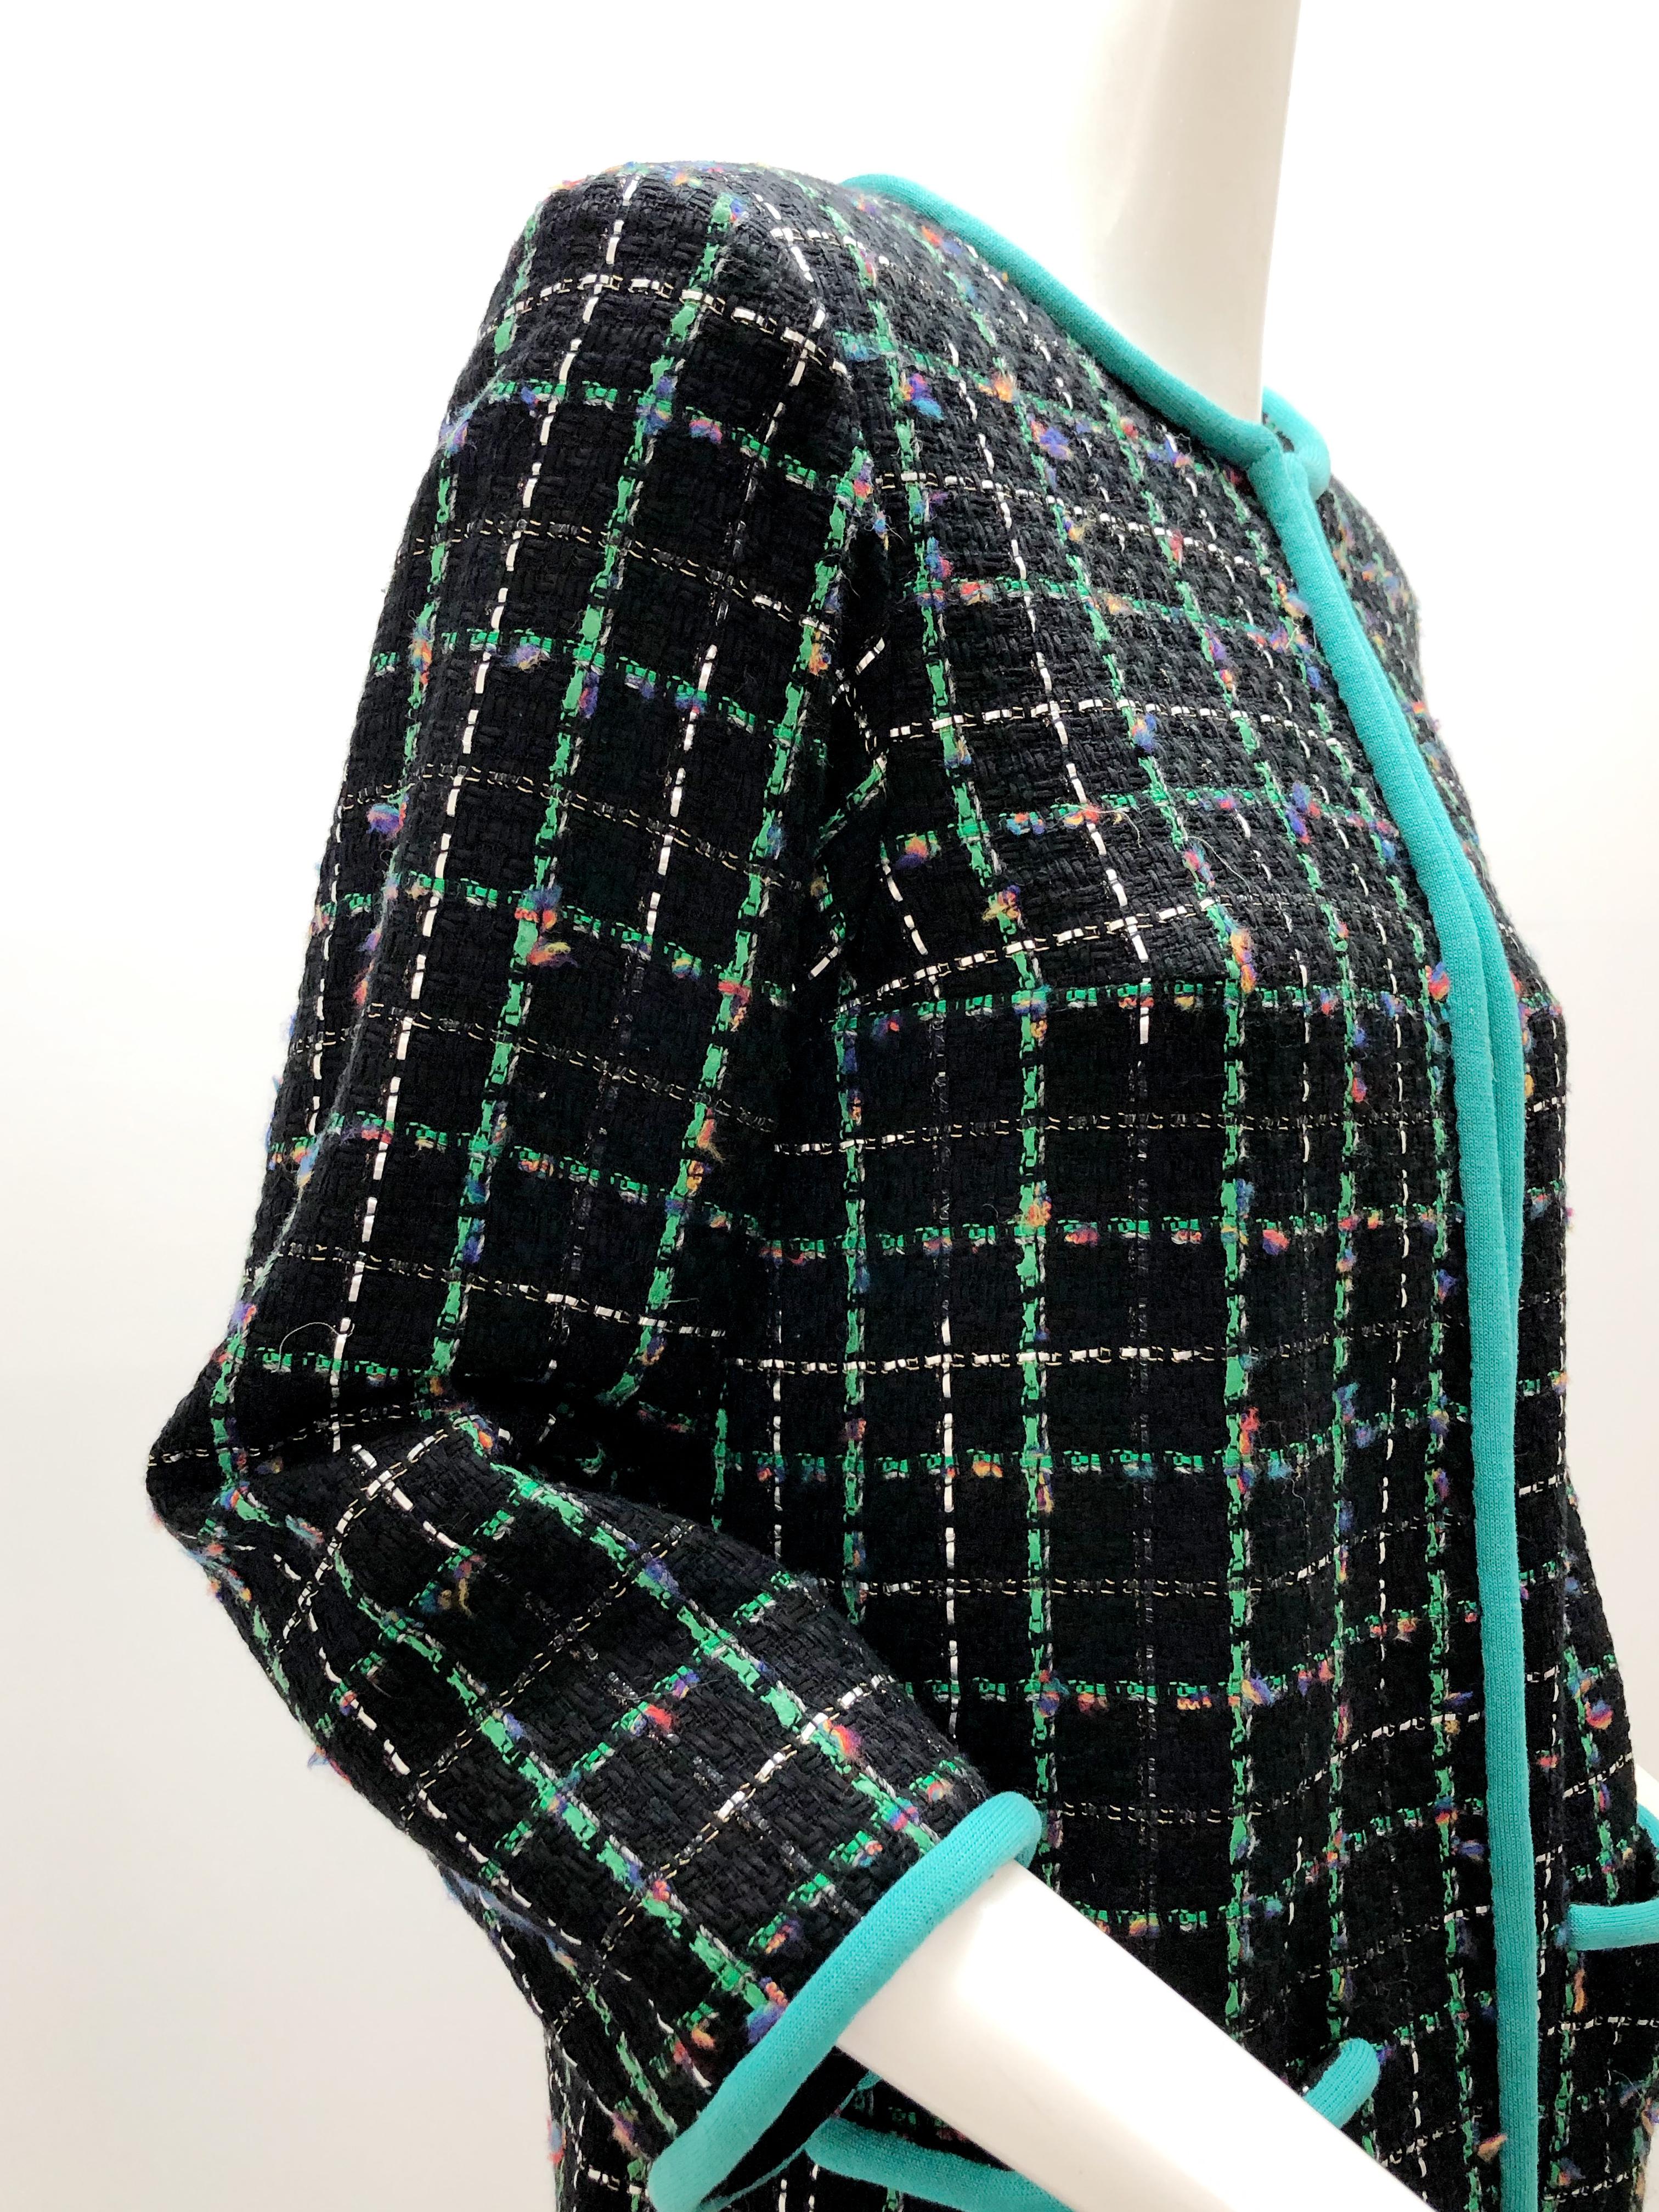 Chanel Black Fantasy Tweed 3/4 Jacket W/ Turquoise Knit Piping & CC Logo Buttons 4